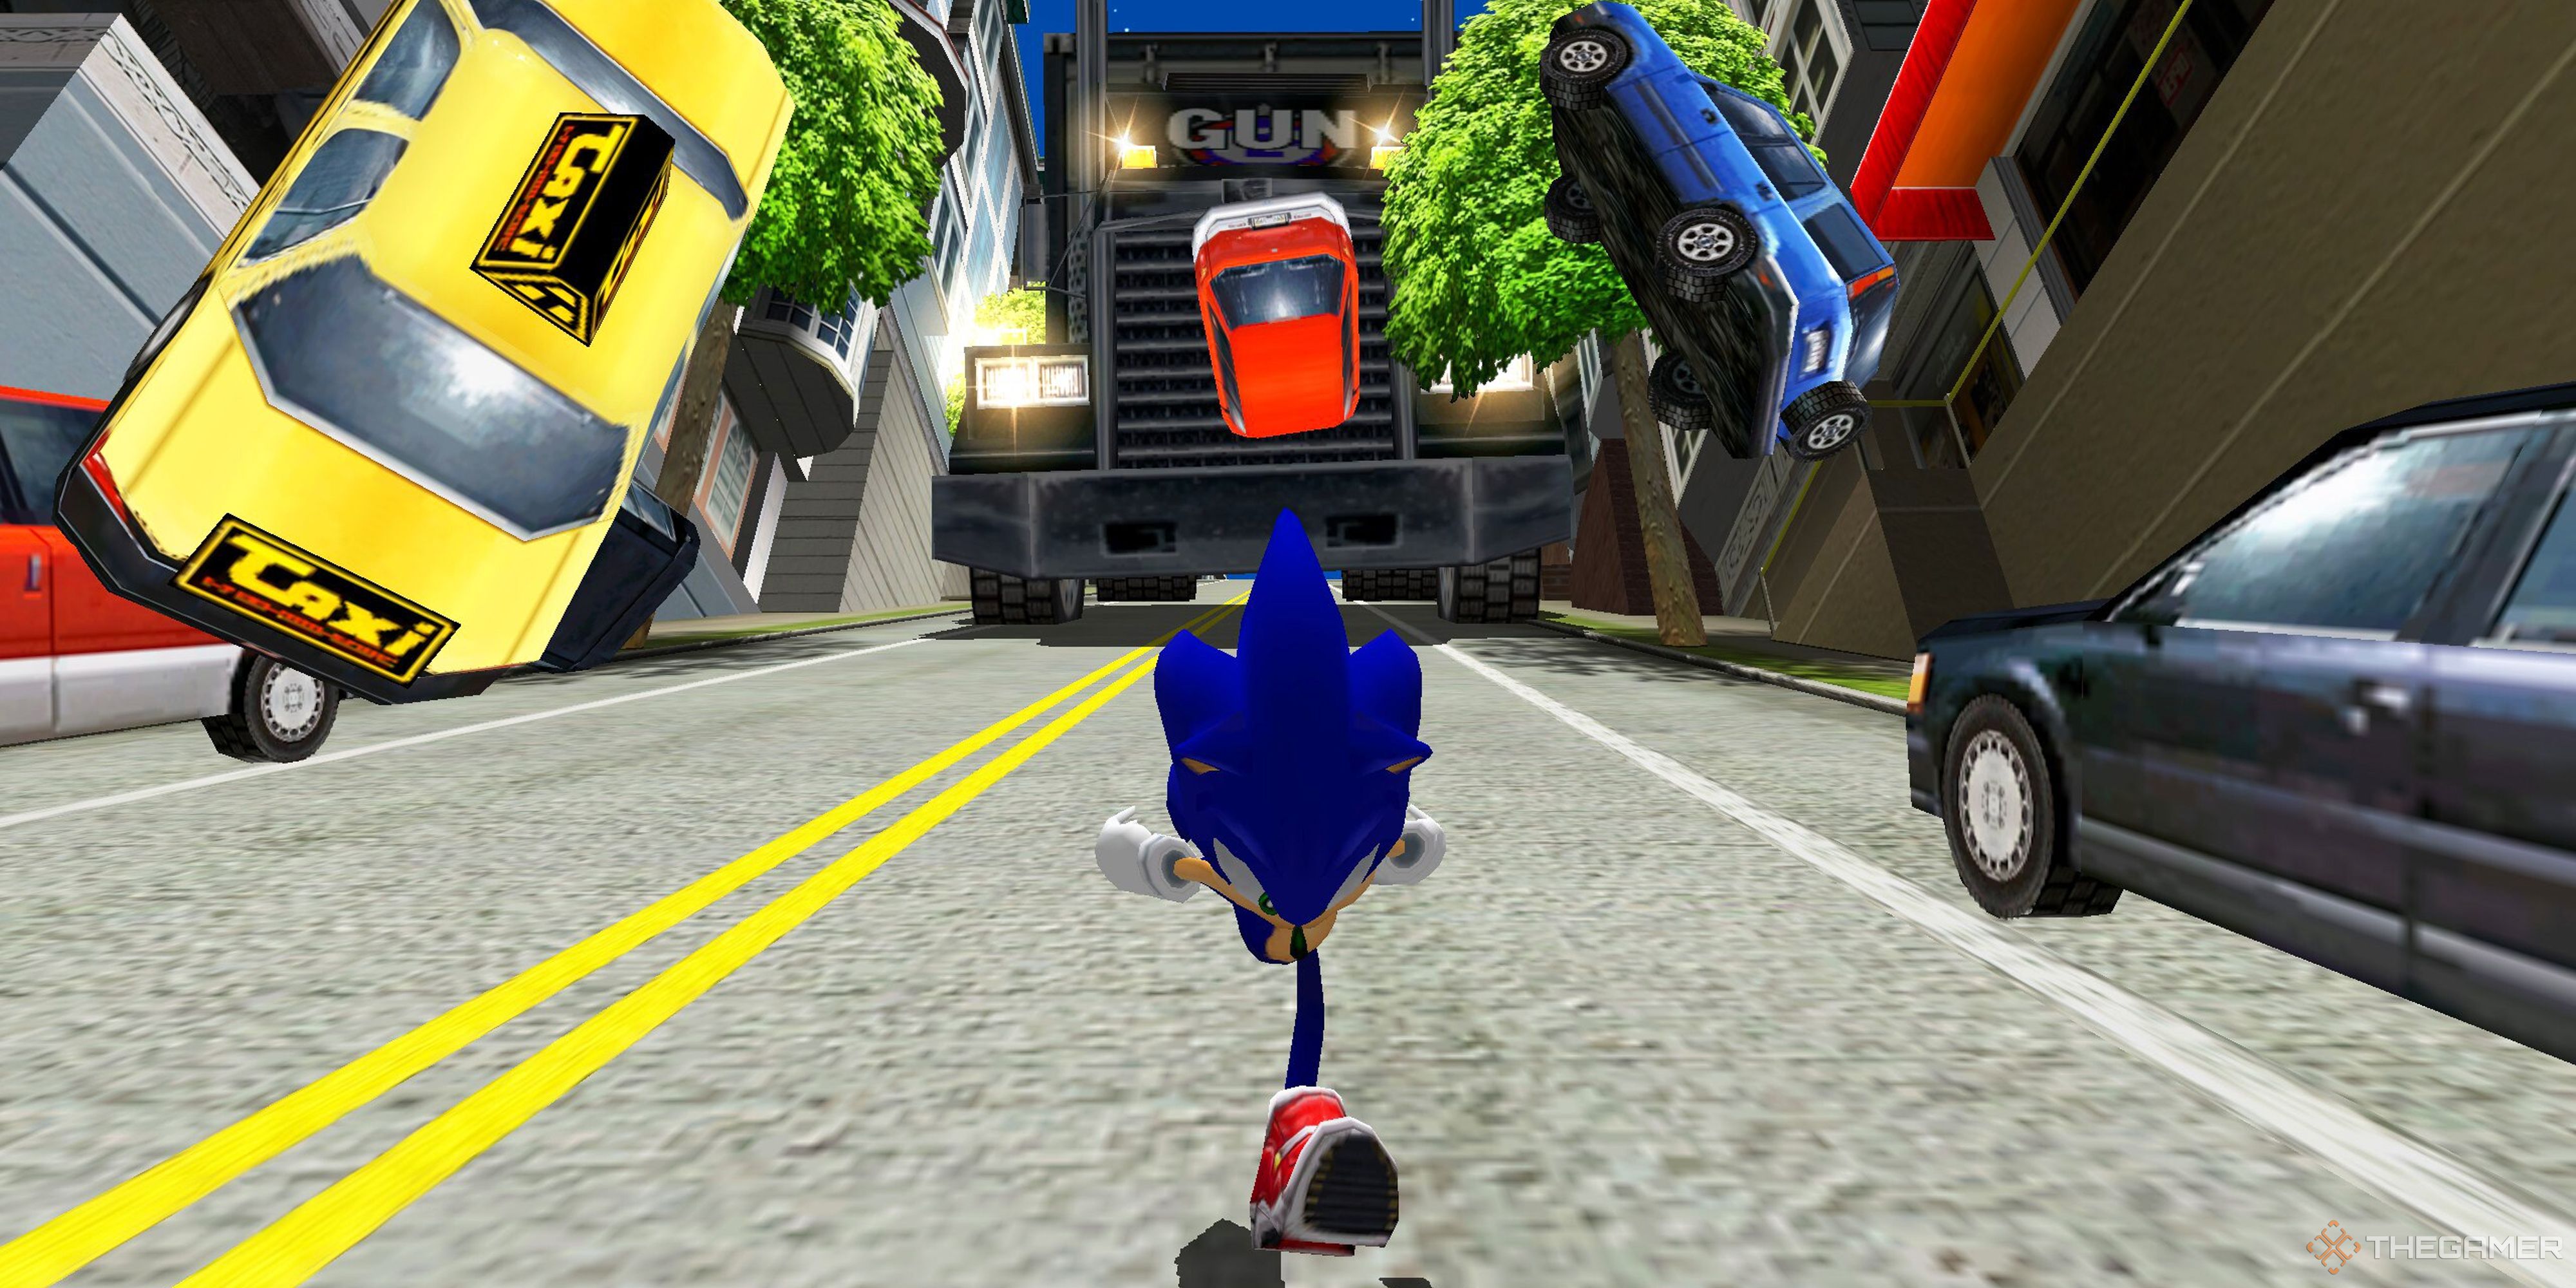 Sonic in Adventure 2 running away from a GUN Truck in San Francisco as cars and taxis fly everywhere